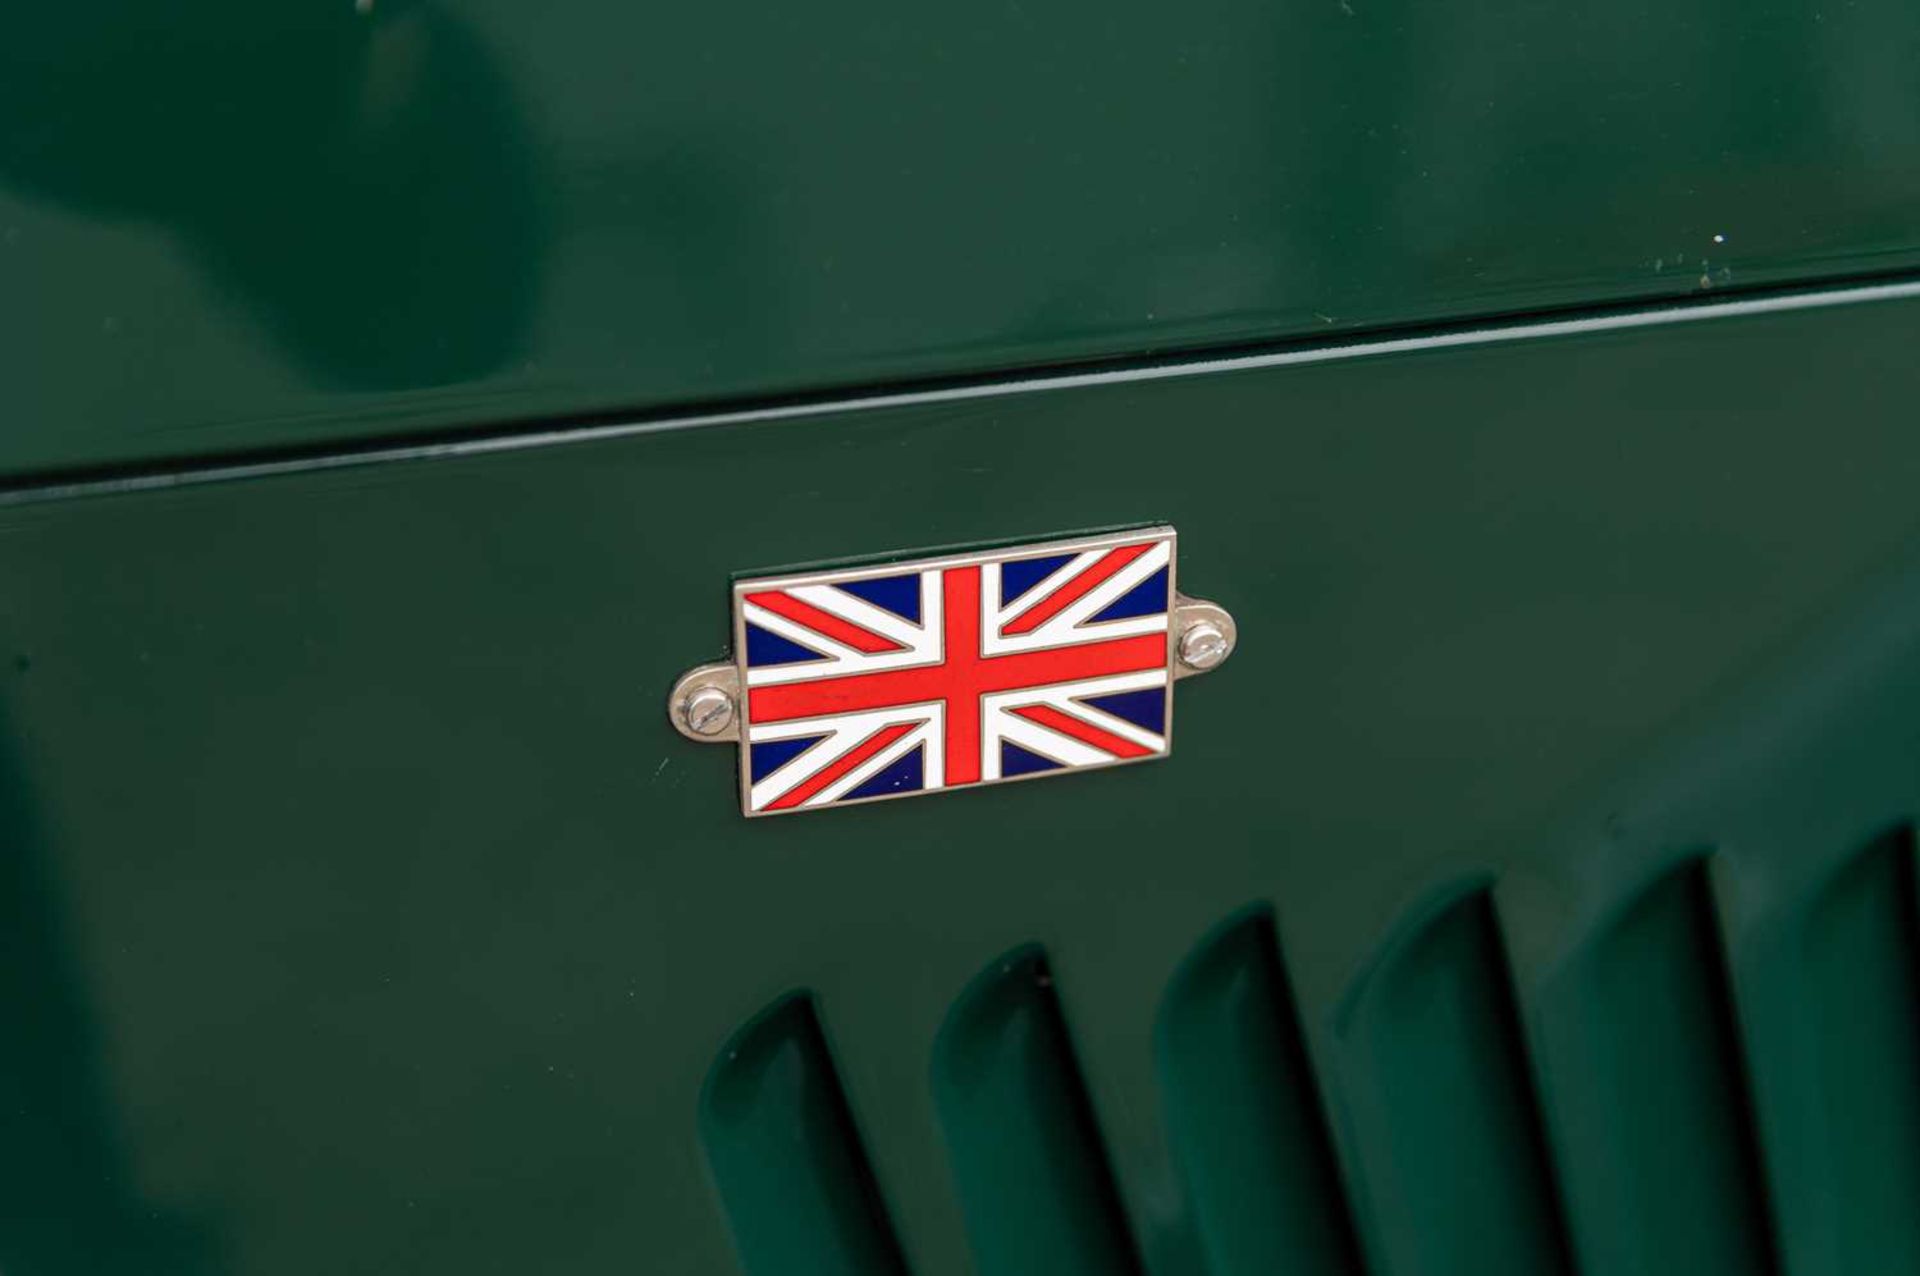 1947 MG TC Midget  Fully restored, right-hand-drive UK home market example - Image 42 of 76